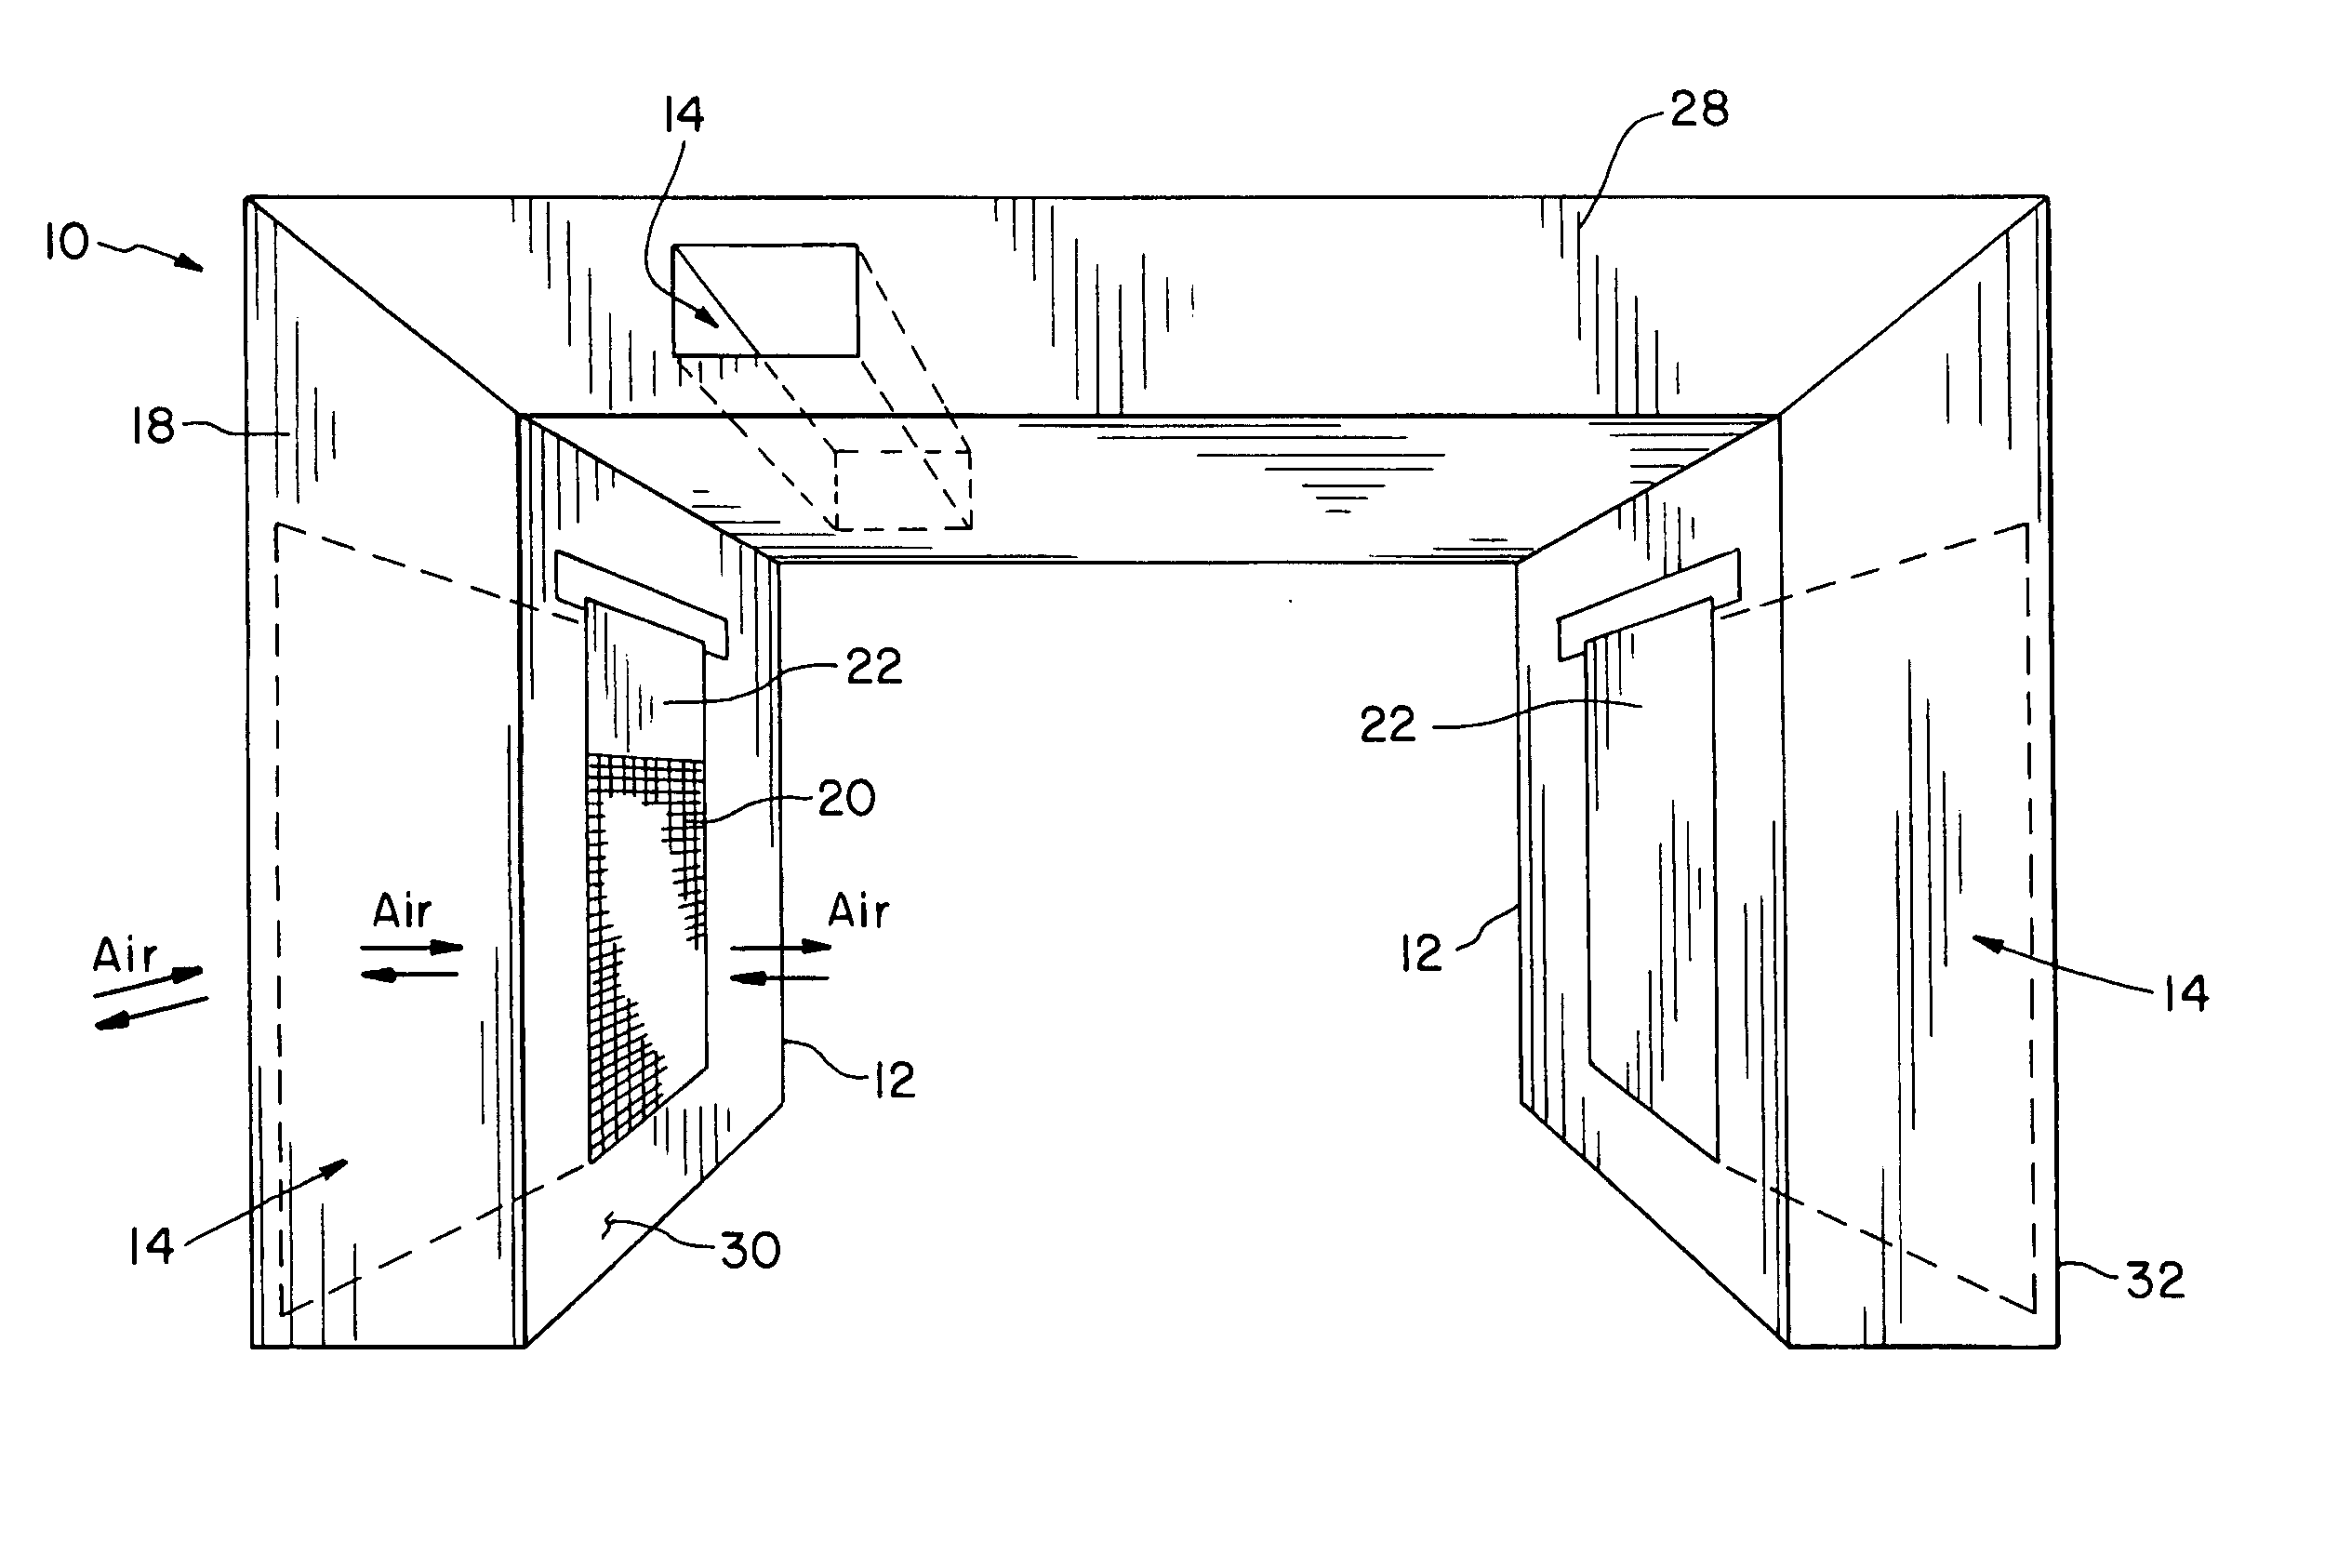 Loading dock seal with flow through vent